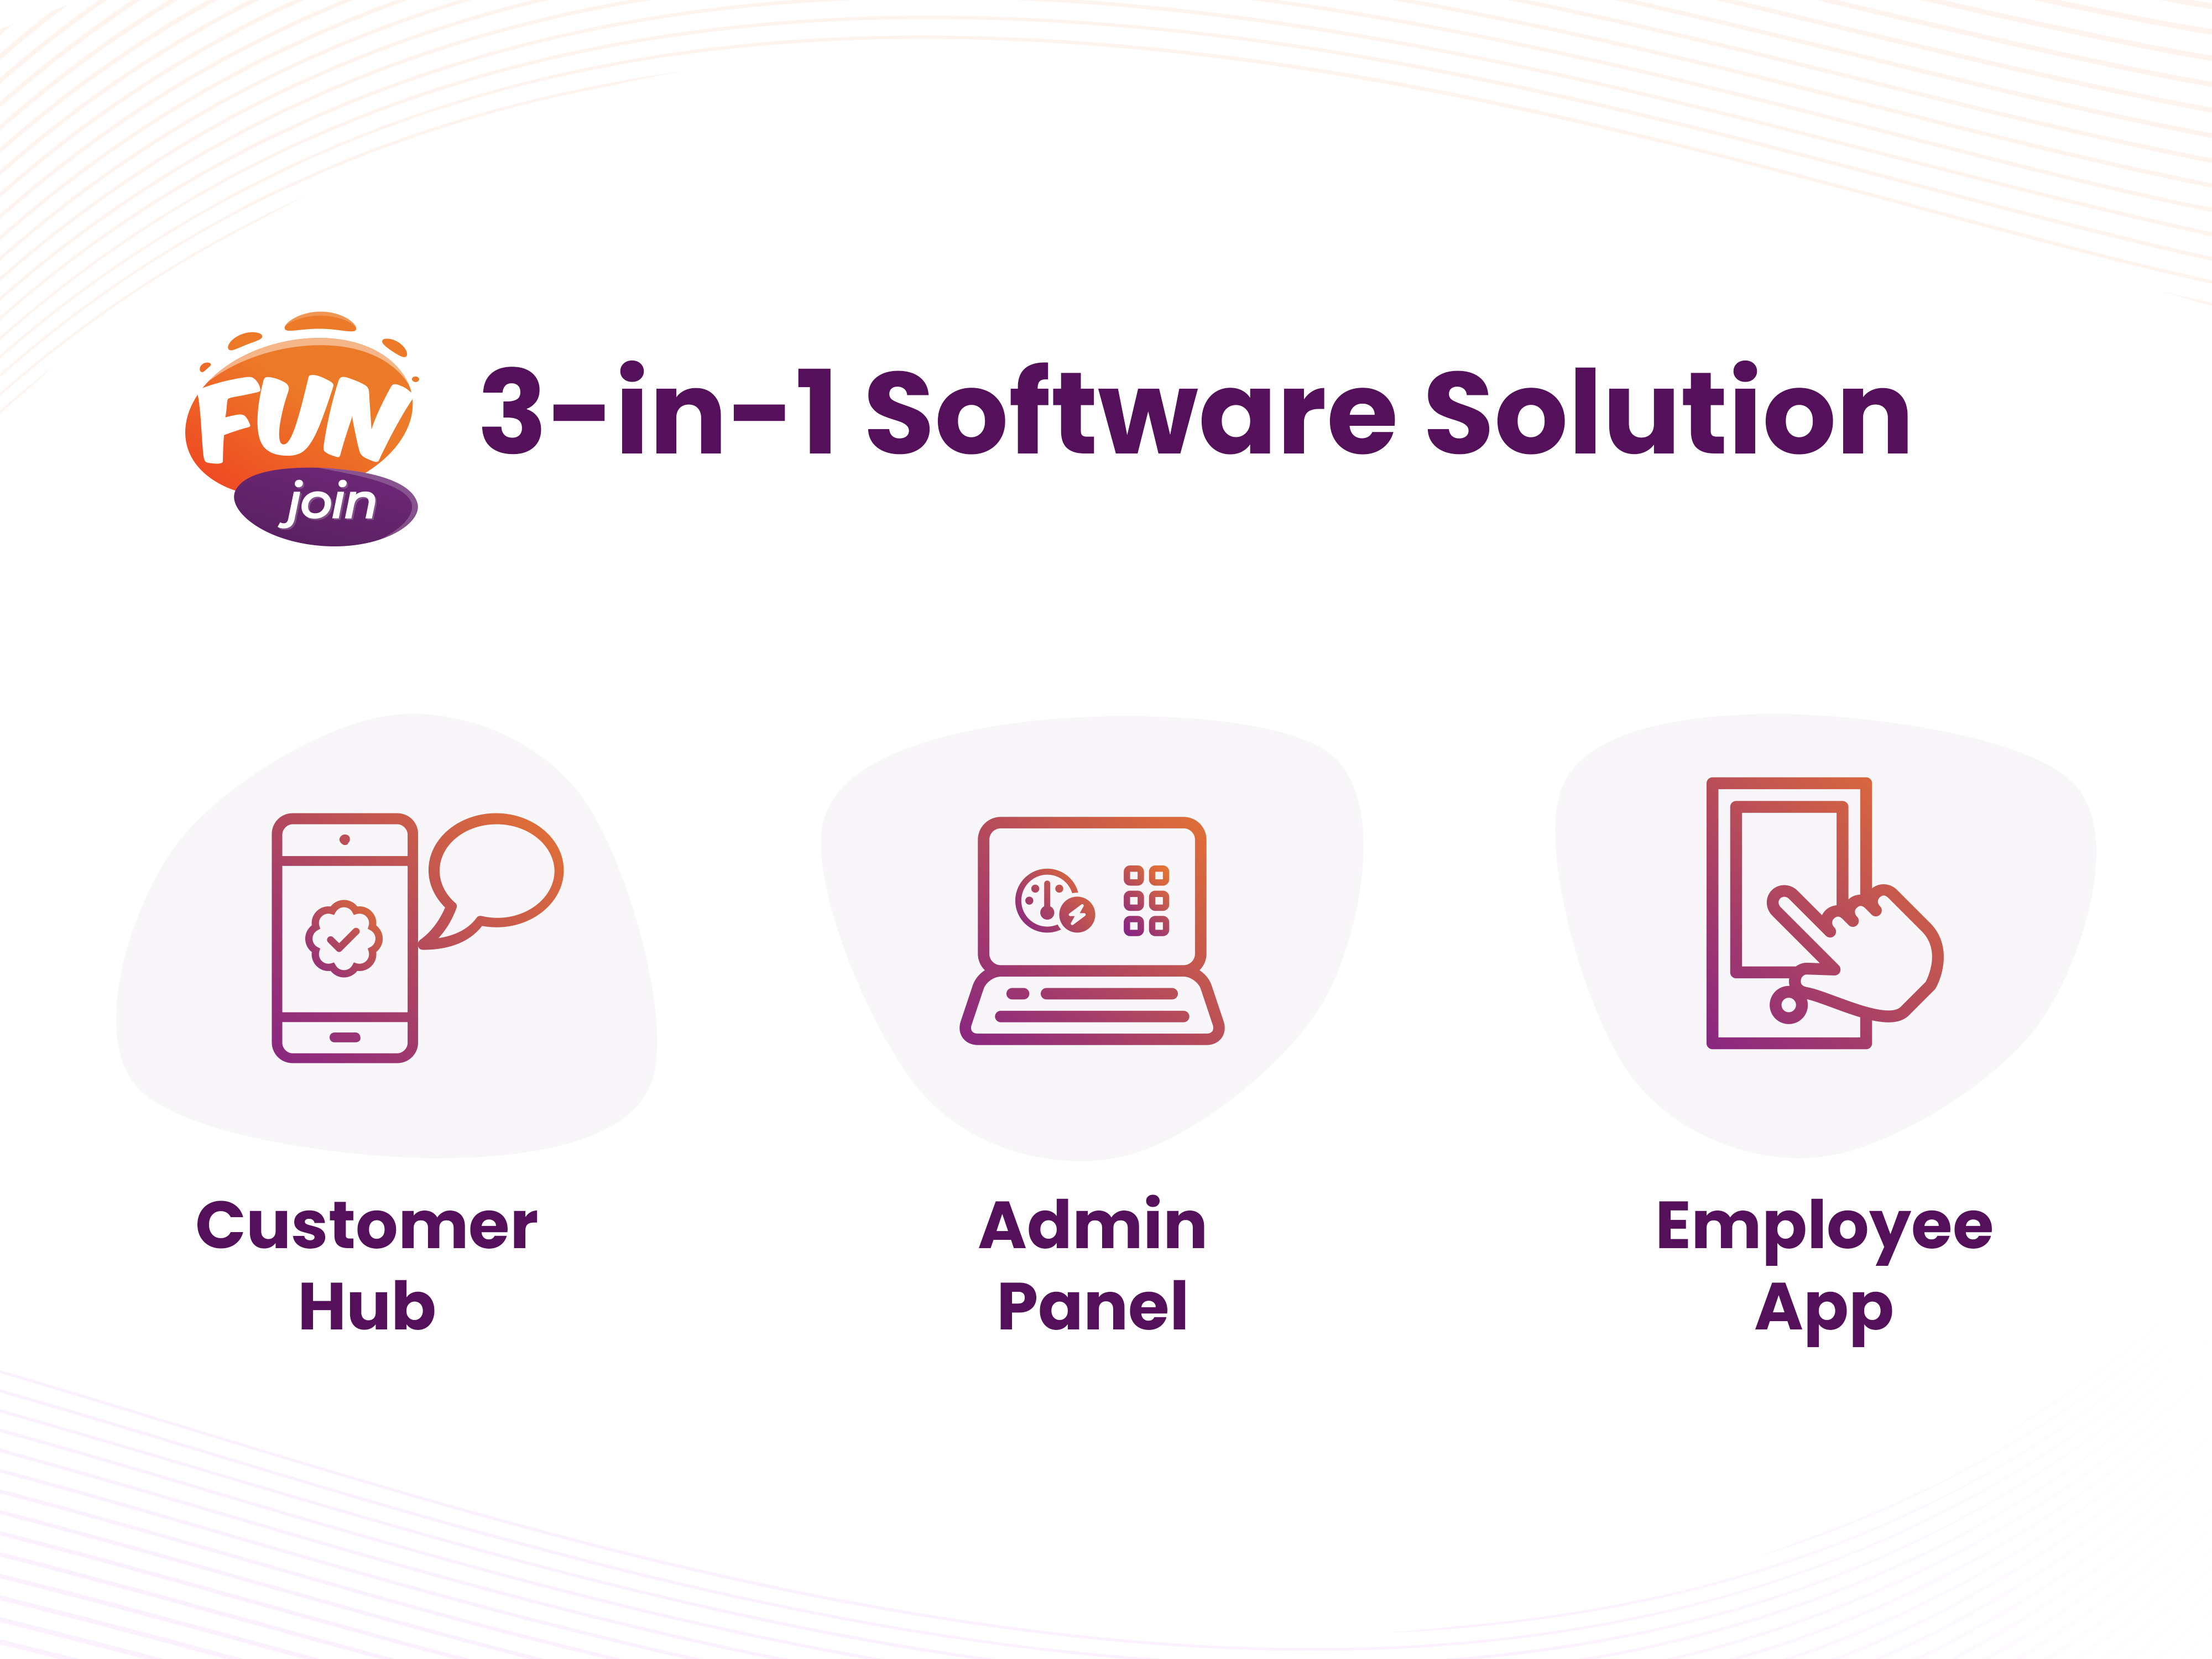 FunJoin's 3-in-1 solution includes a Customer Hub, Admin Panel, and Employee Mobile App, offering a comprehensive, streamlined approach to managing customer interaction, administration, and employee coordination.